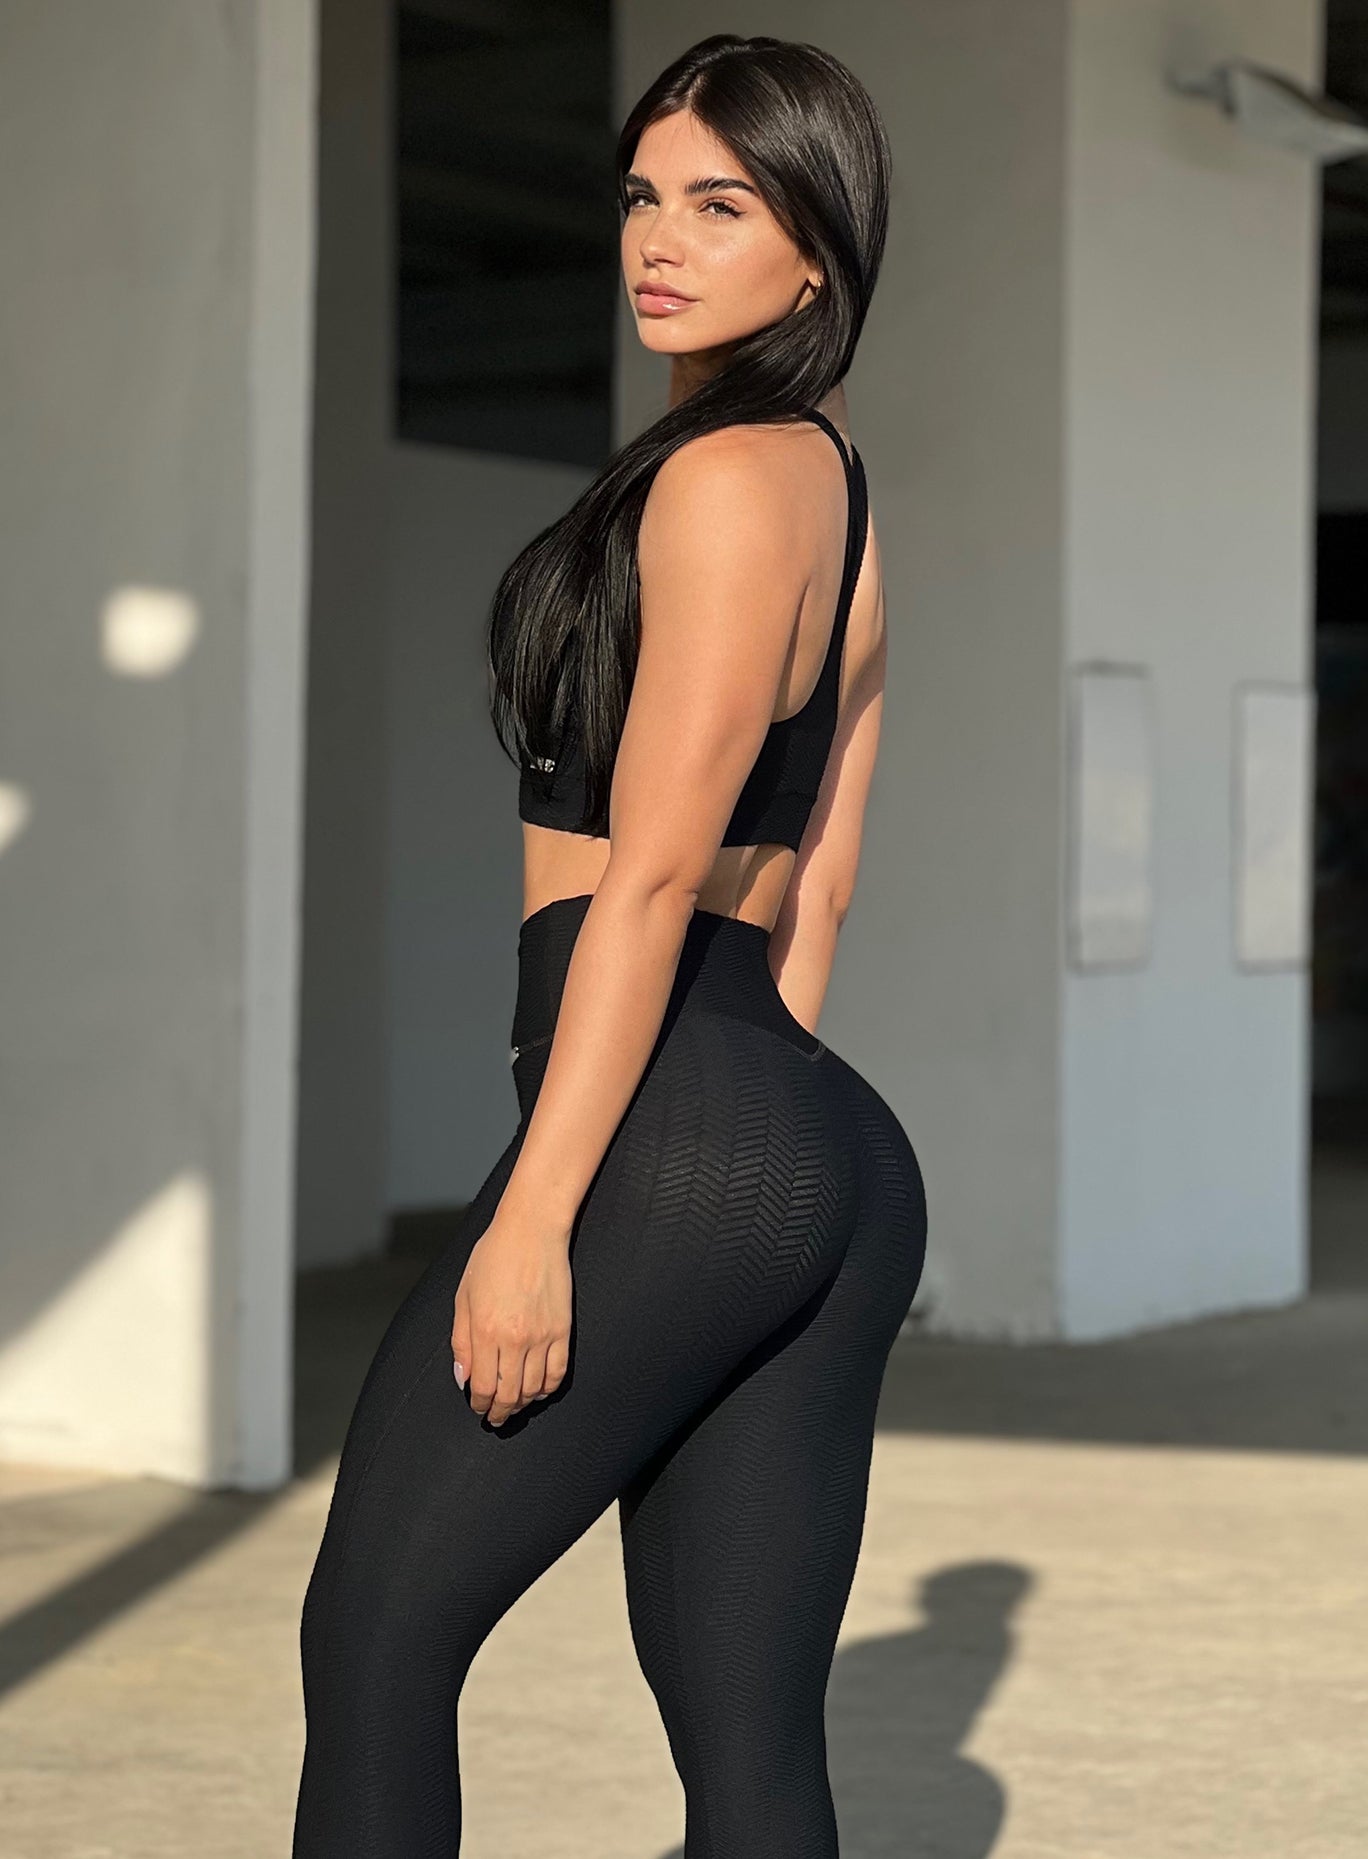 Left side profile view of a model wearing our chevron sports bra in jet black color and a matching leggings